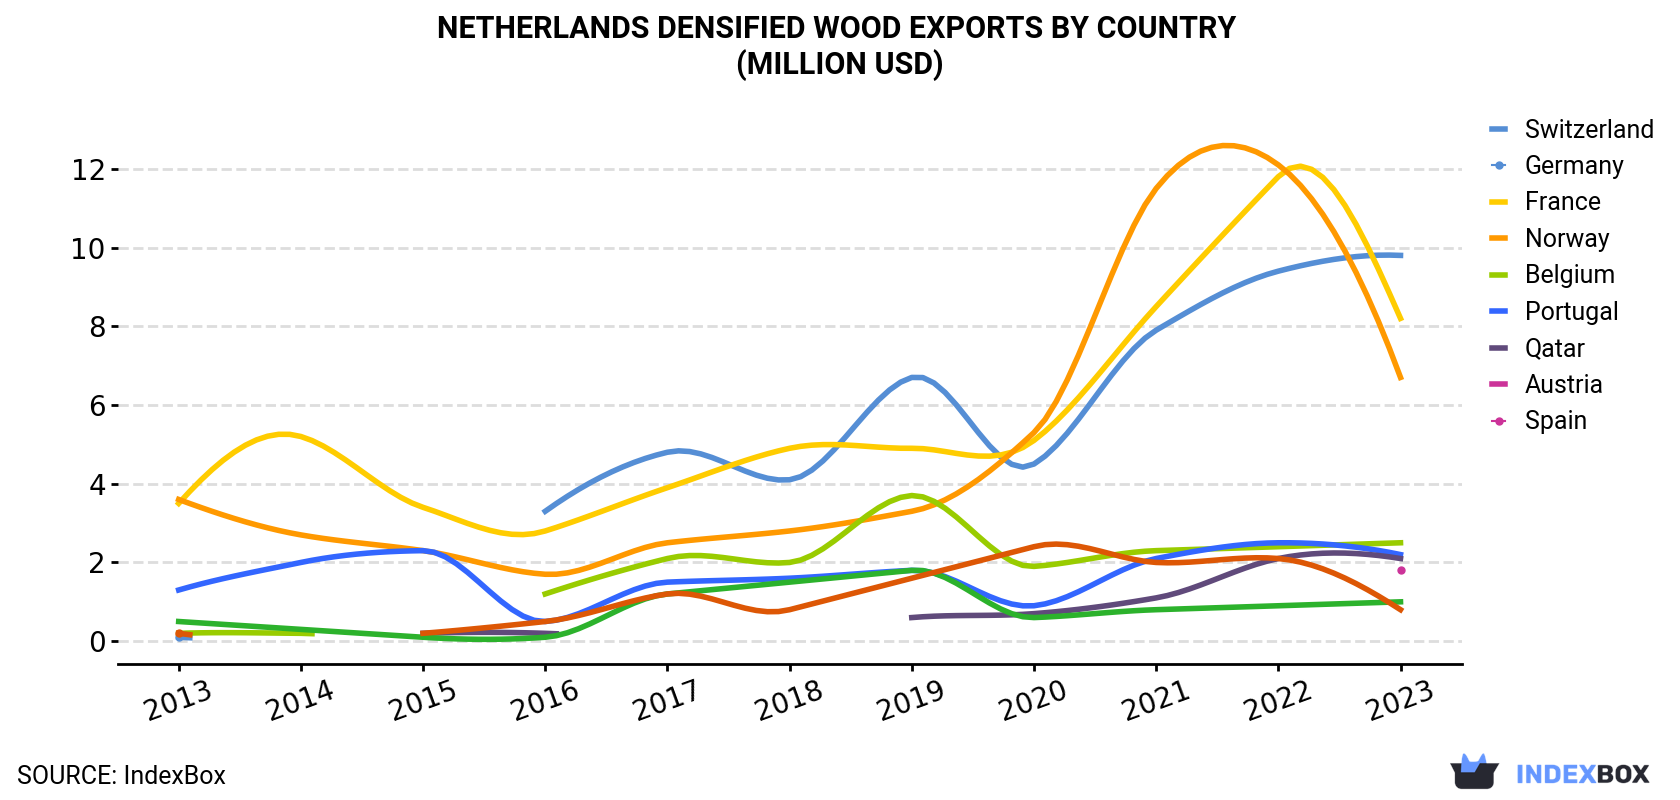 Netherlands Densified Wood Exports By Country (Million USD)